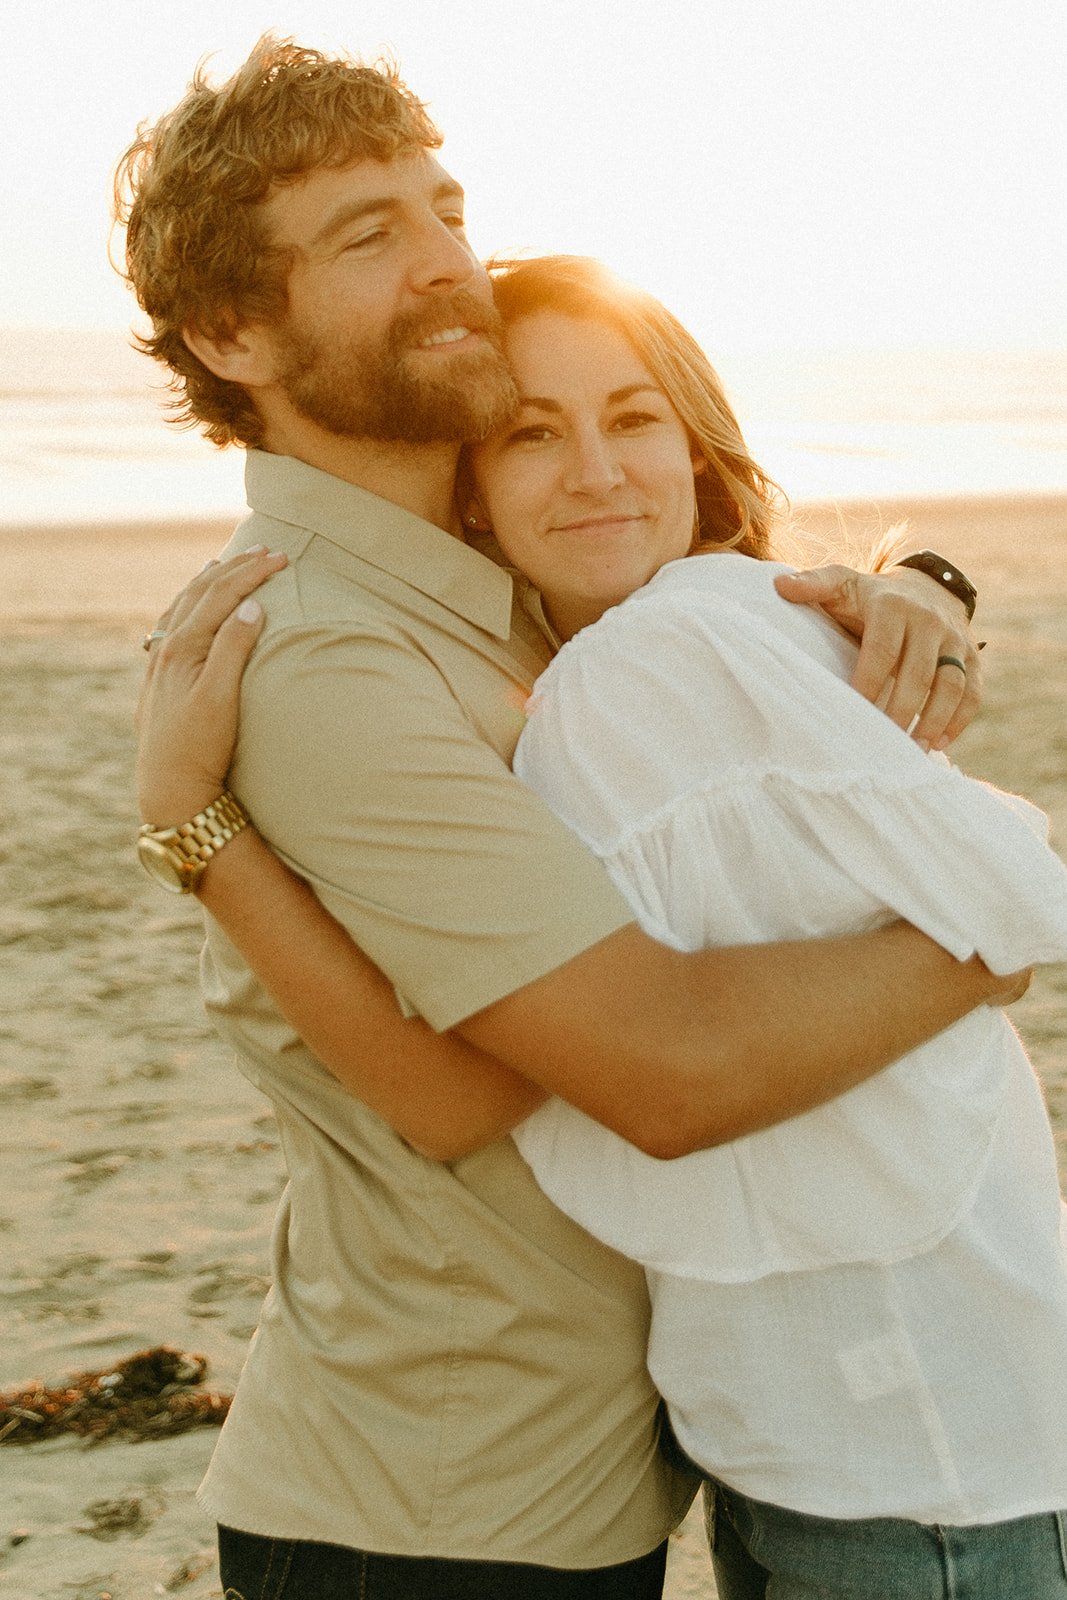 Couple hugging and smiling on the beach